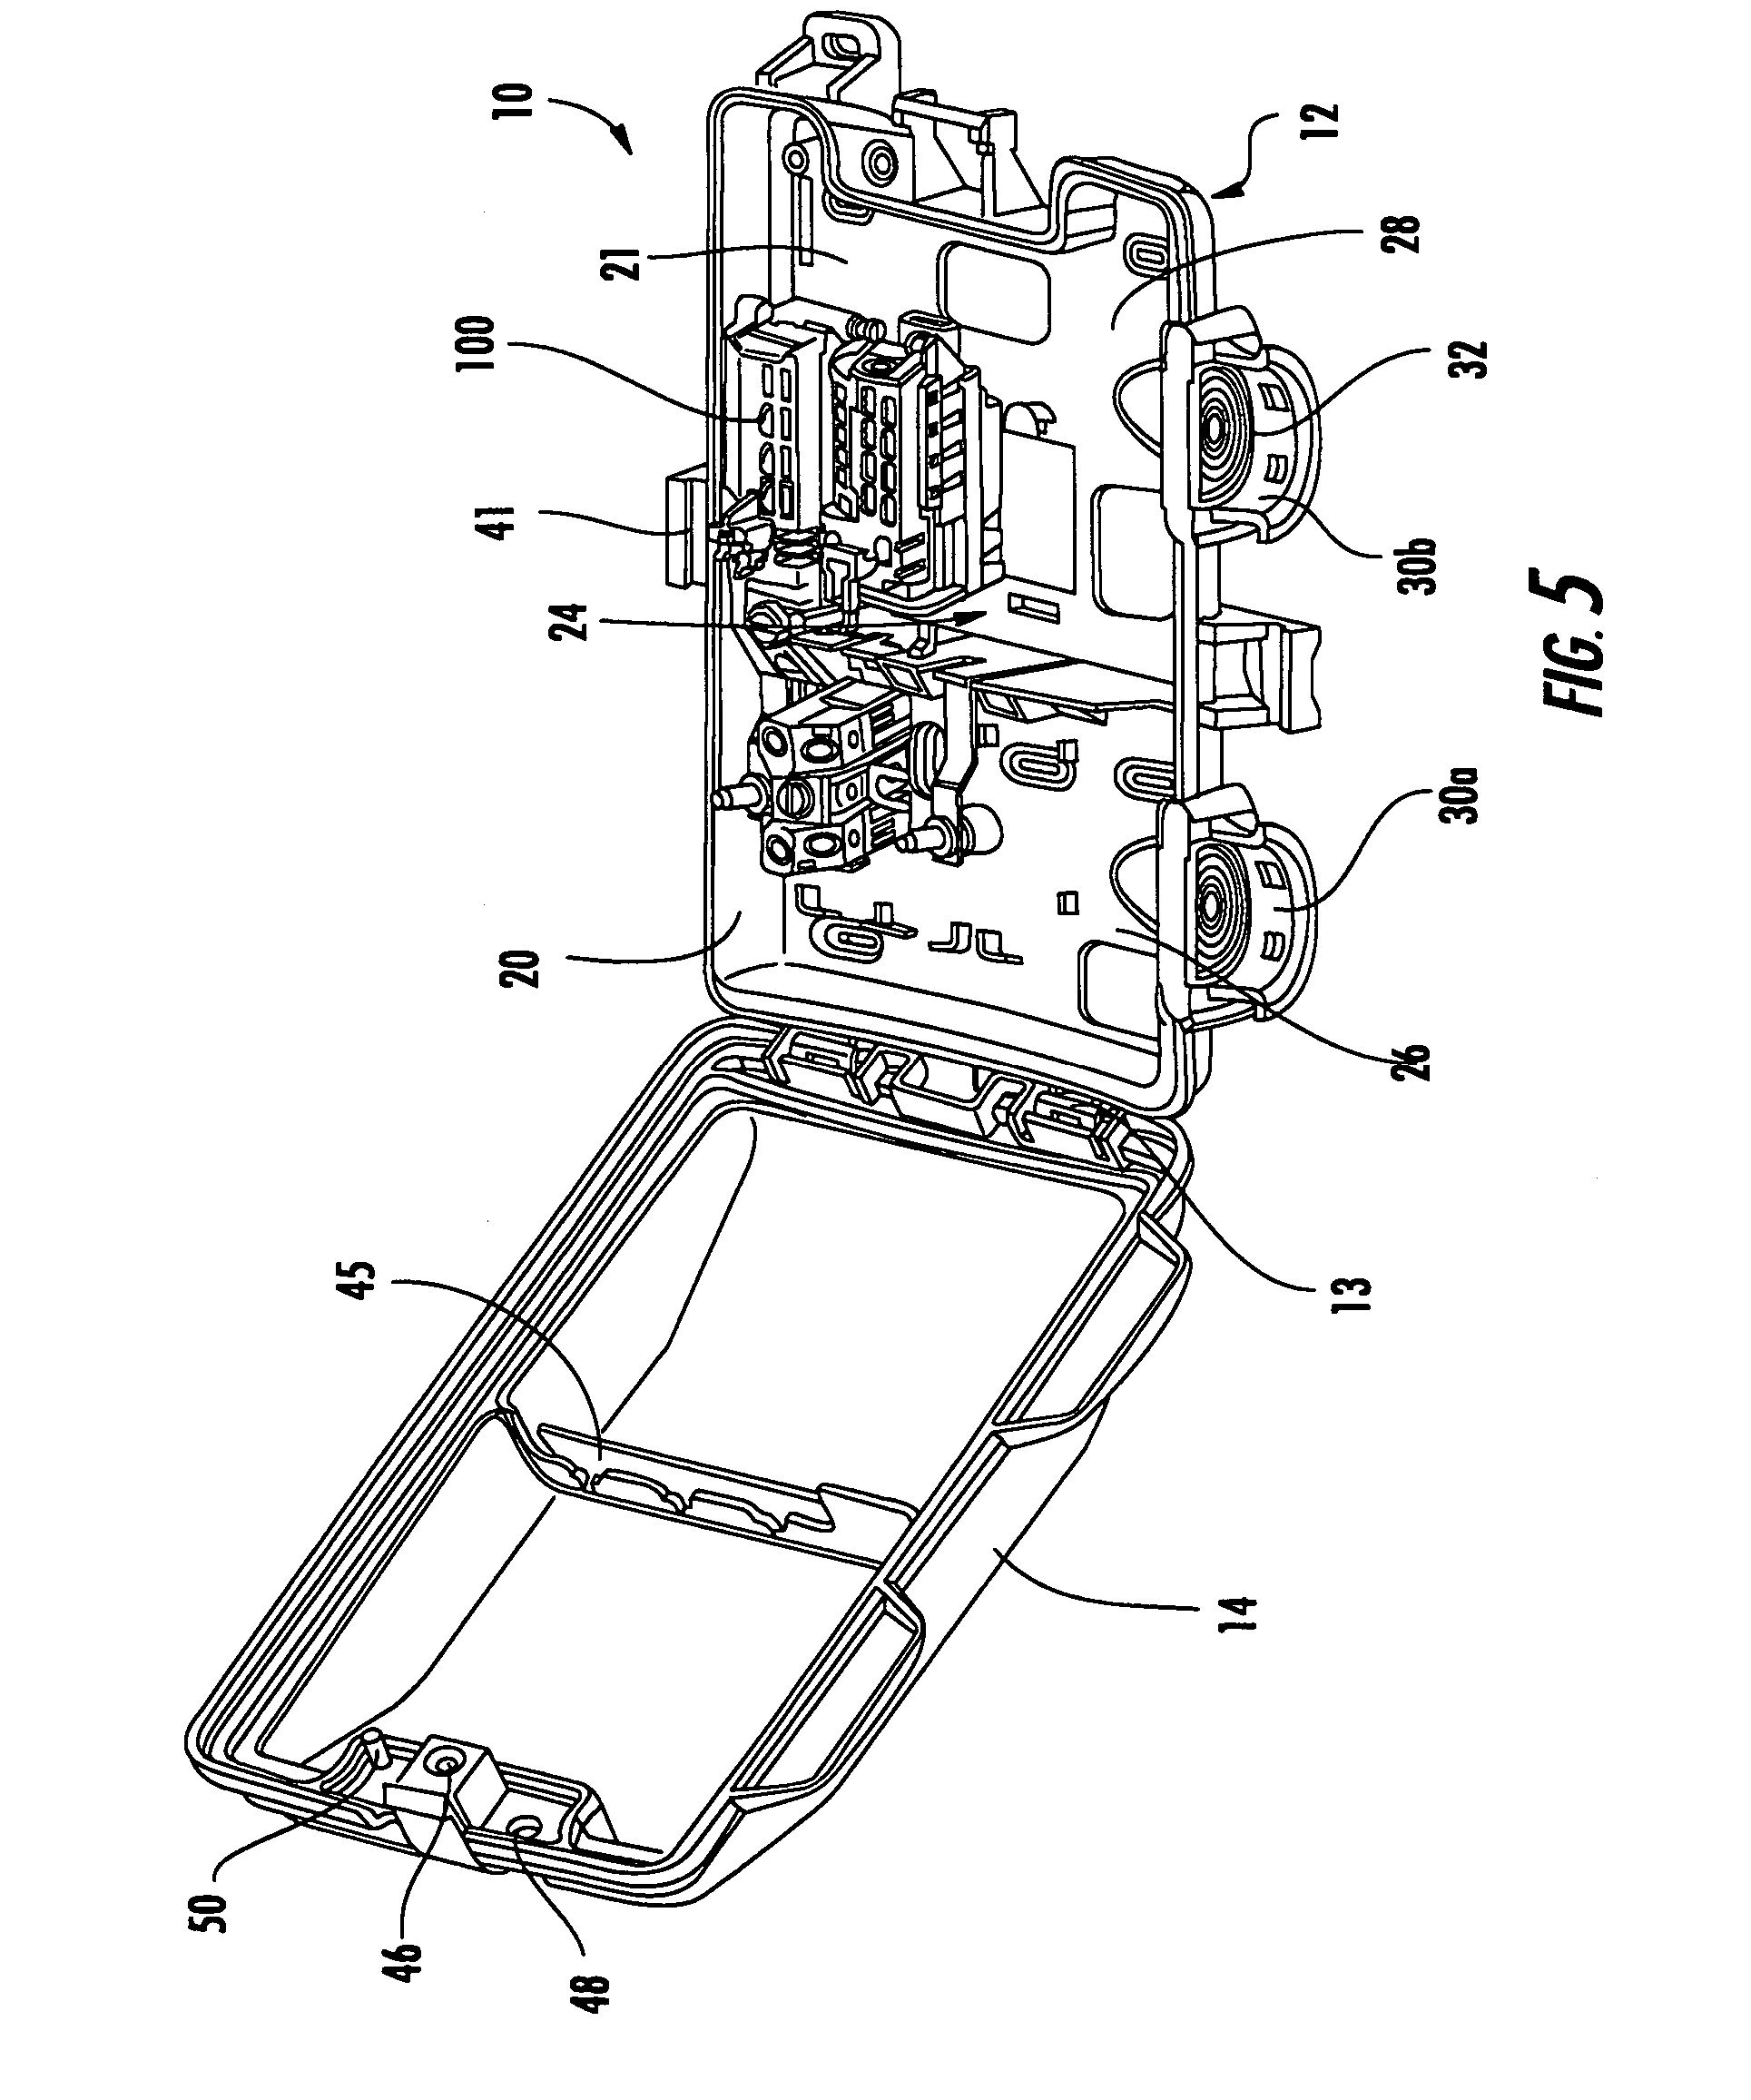 Network interface device, apparatus, and methods